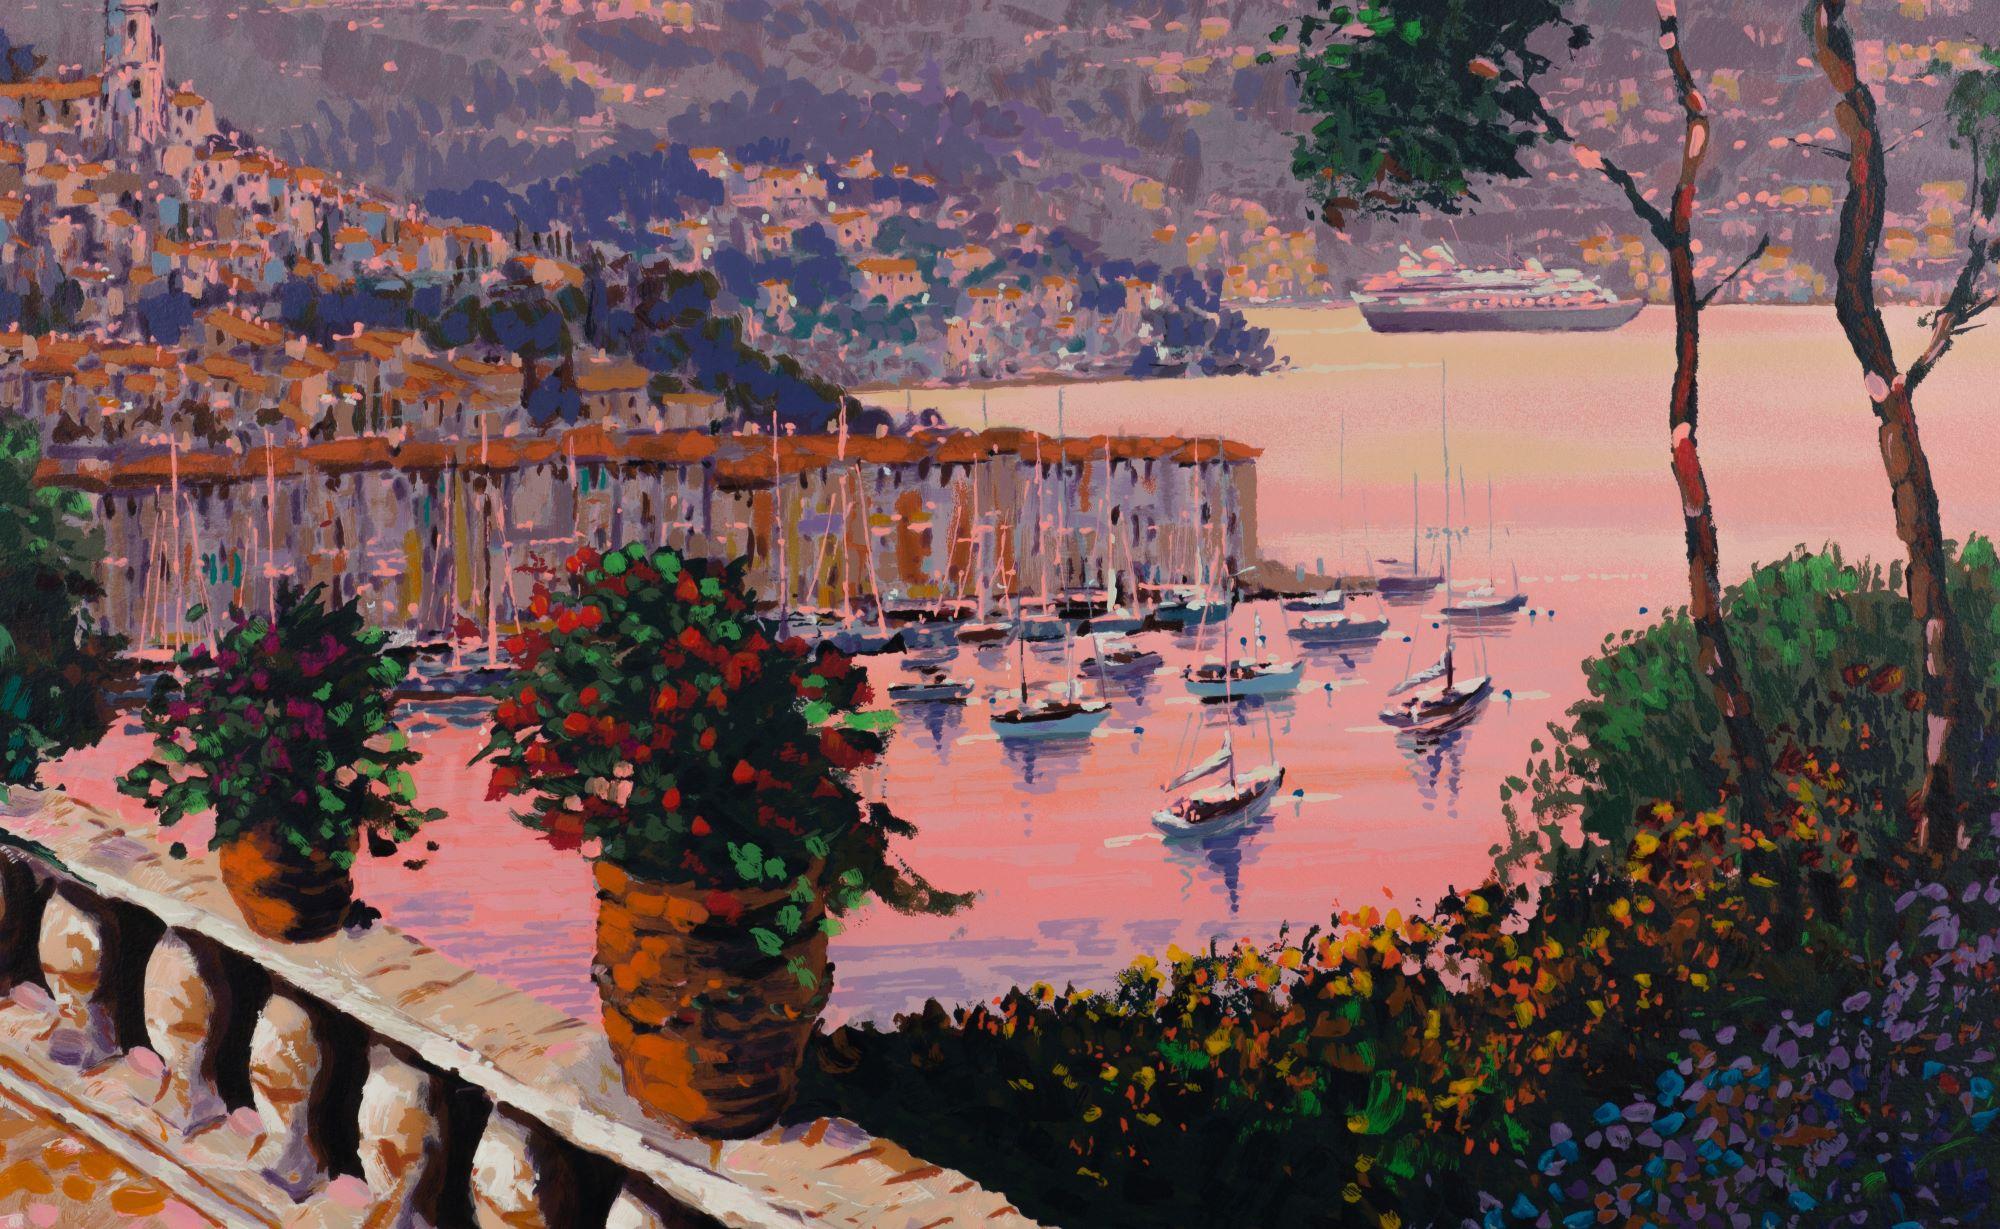 Portofino Evening is a serigraph on paper, image size 27 x 36 inches, signed ‘Kerry Hallam’ lower right and numbered lower left. From the edition of 500, numbered 171/ 175 (there were also 25 APs, 150 Roman, and 150 on canvas). Framed in a classic,